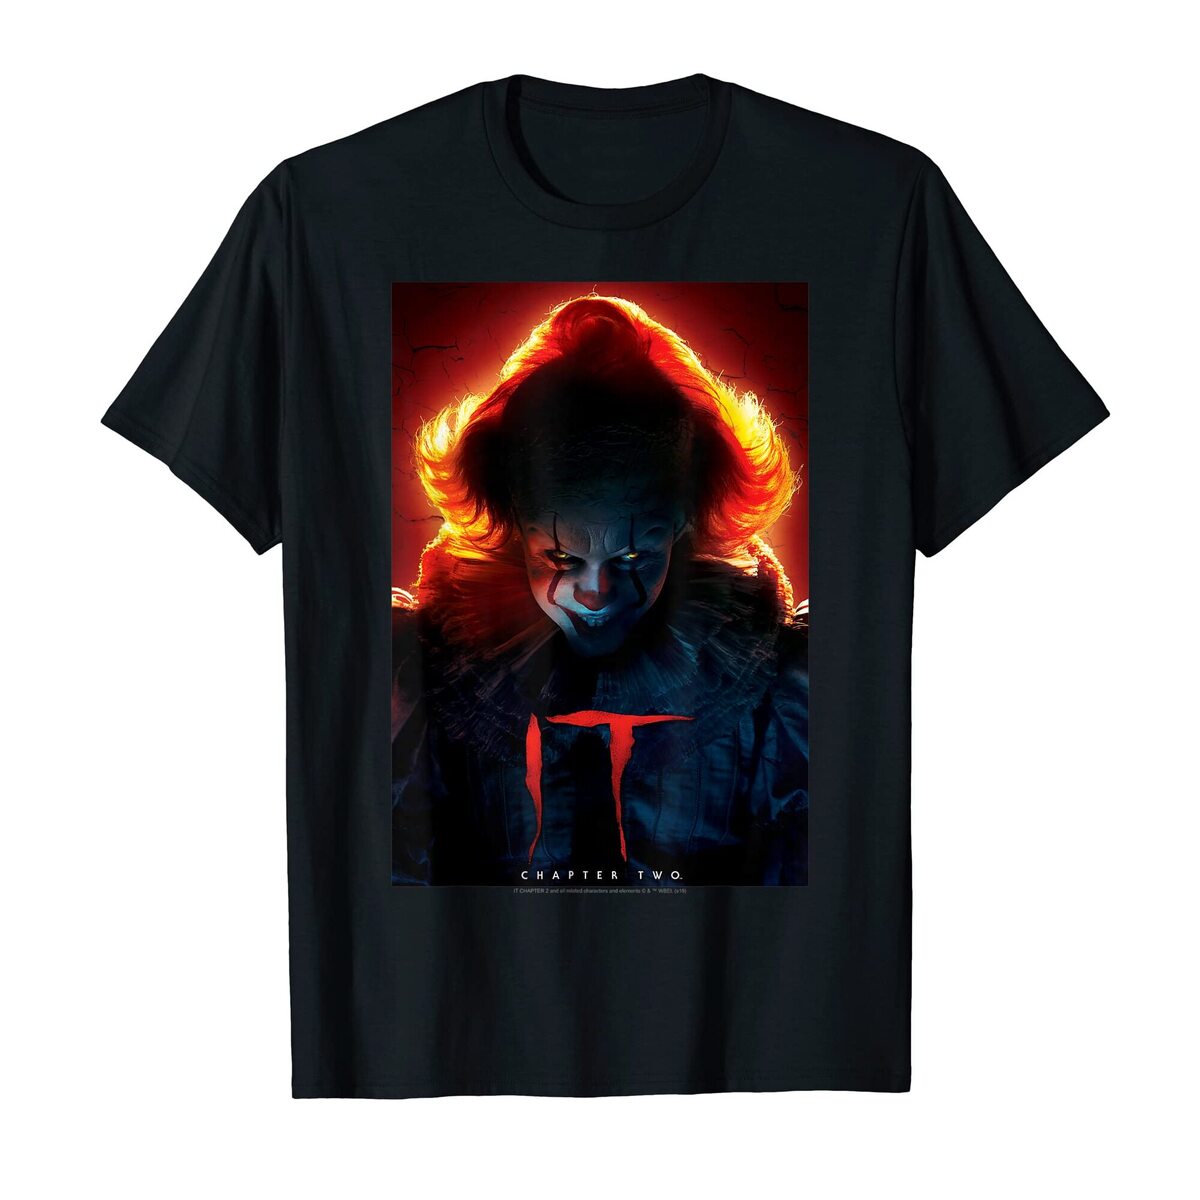 Pennywise Glow IT Movie T-Shirt